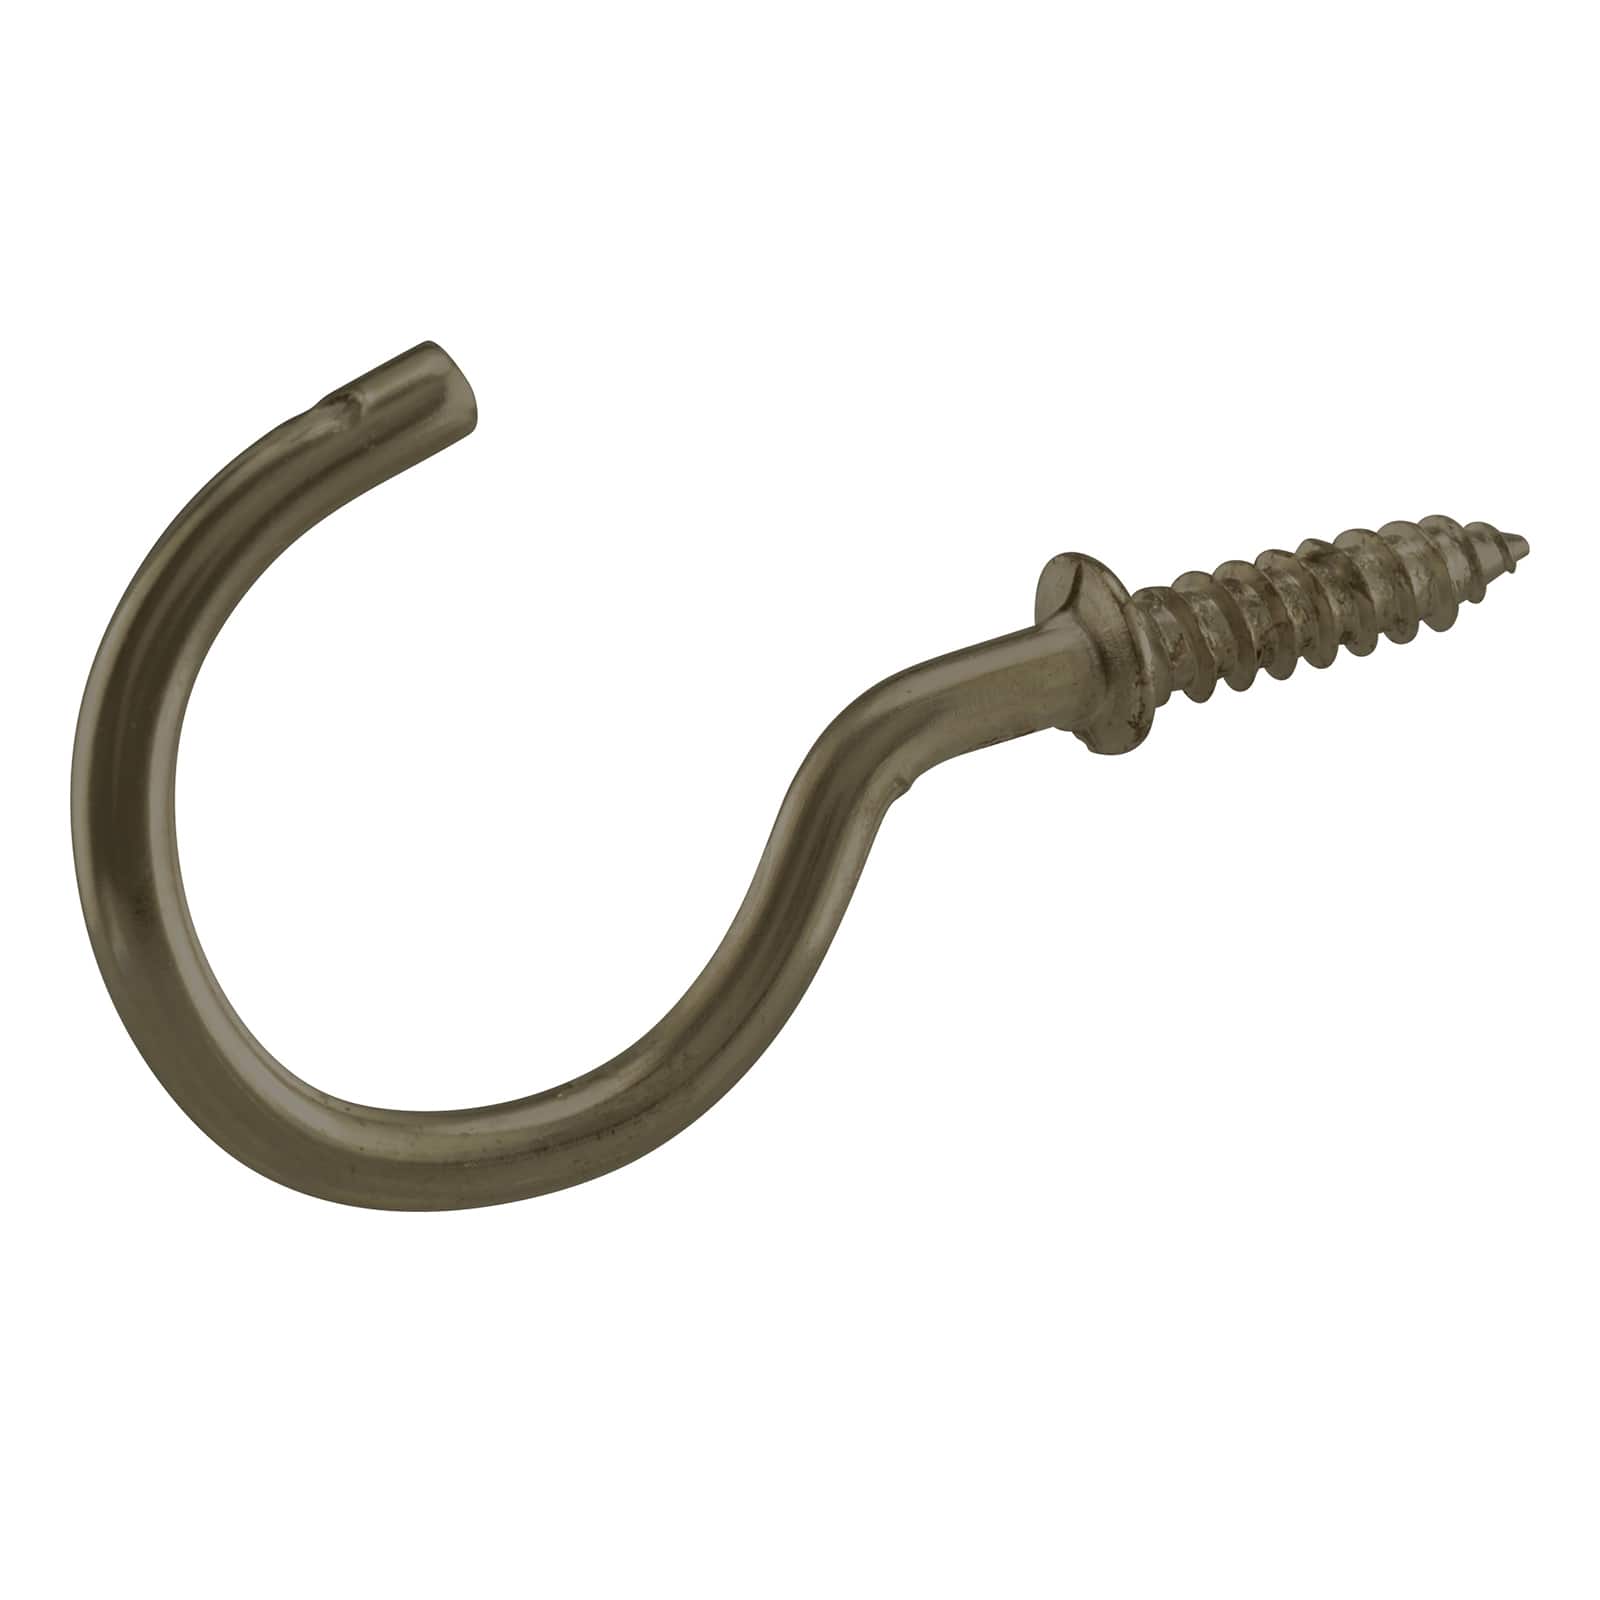 Cup Hooks 1 Brass Plated (Per 100)